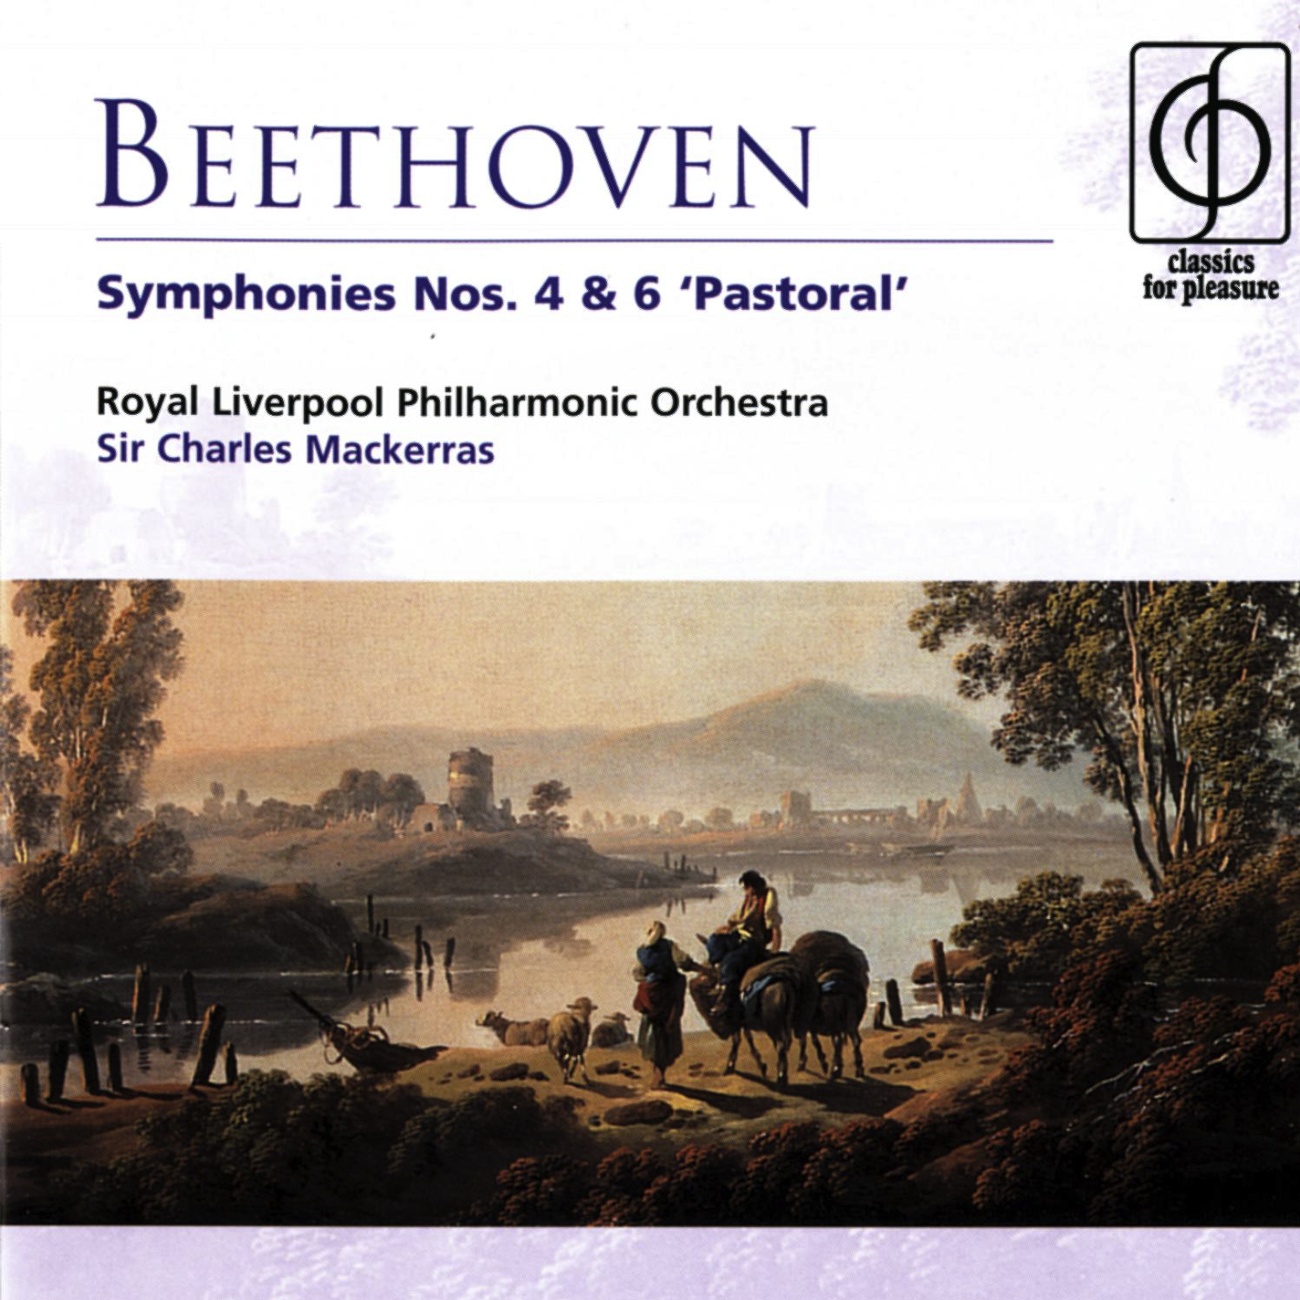 Symphony No. 6 in F 'Pastoral' Op. 68: II.      Scene by the brook (Andante molto moto)